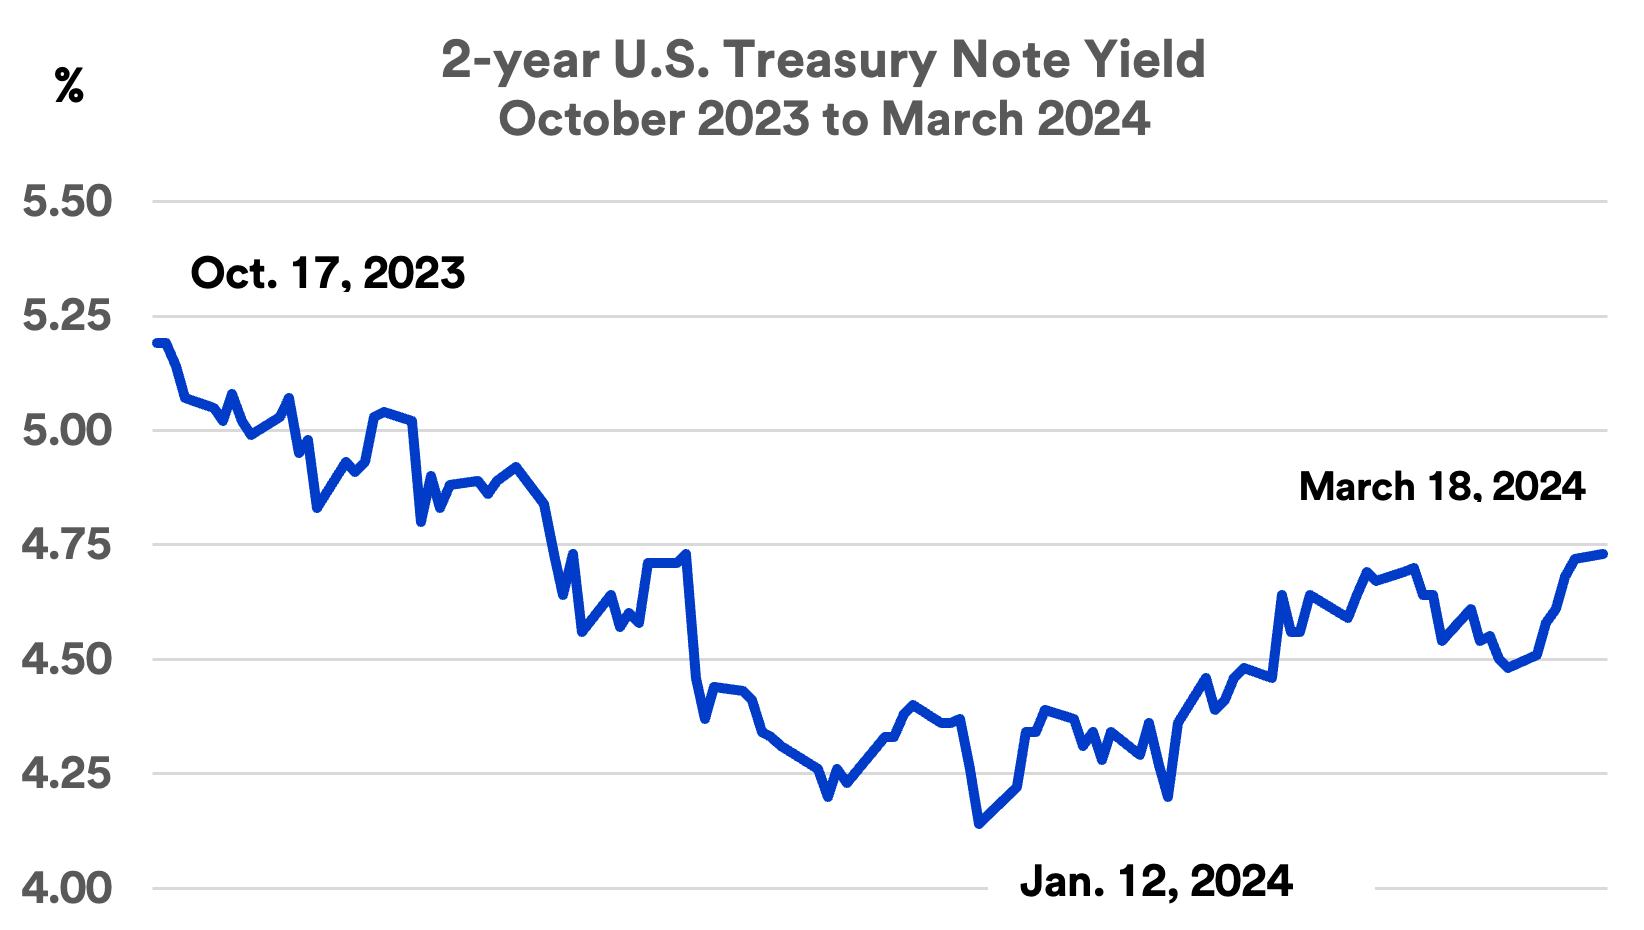 Chart depicts the yield on the U.S. Treasury Note during the time period of October 17, 2023, and March 18, 2024.